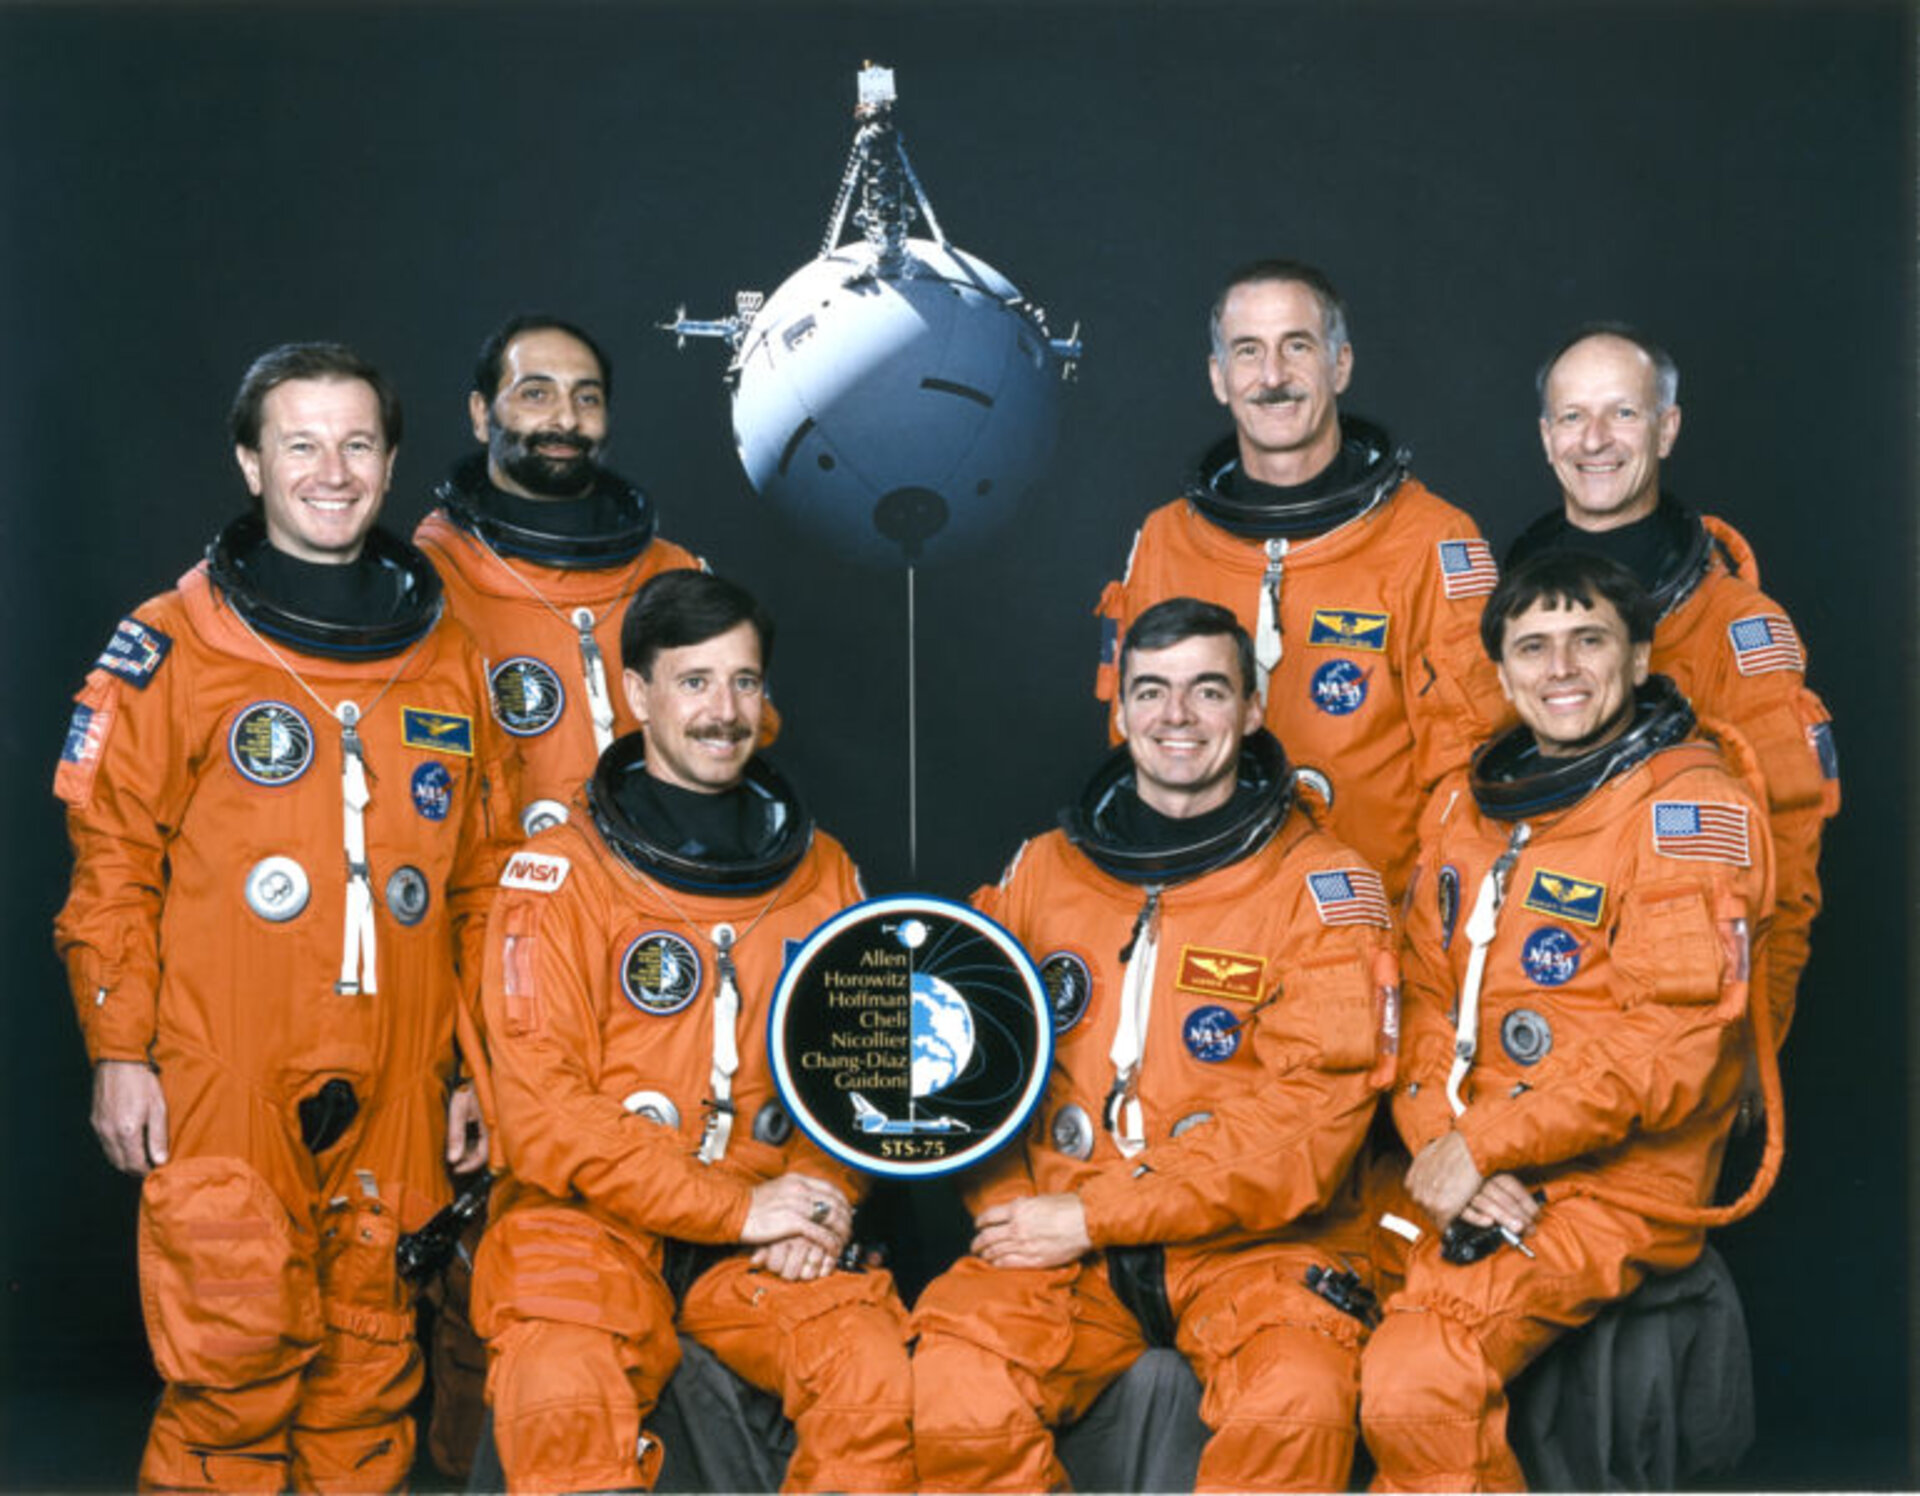 STS-75 Crew with: A. Allen, S. Horowitz, J. Hoffman, M. Cheli, C. Nicollier, F. Chang-Diaz and U. Guidoni